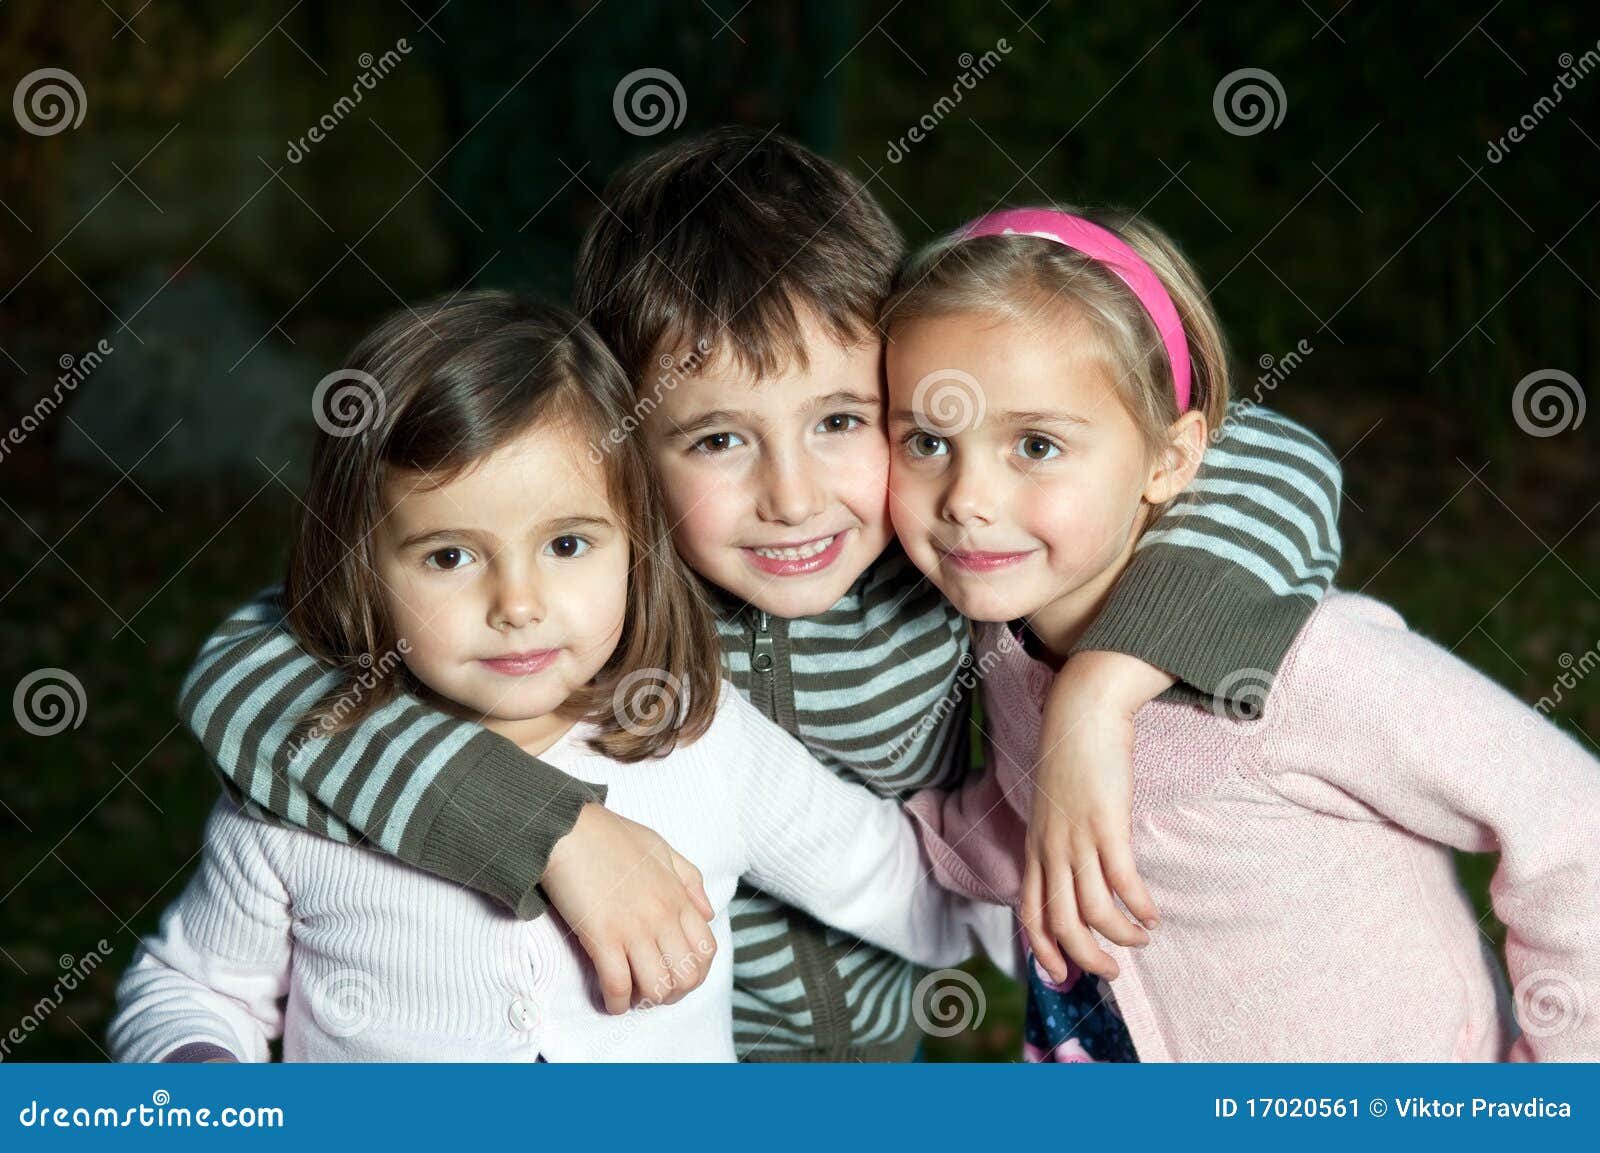 My two sisters stock image. Image of portrait, little ...